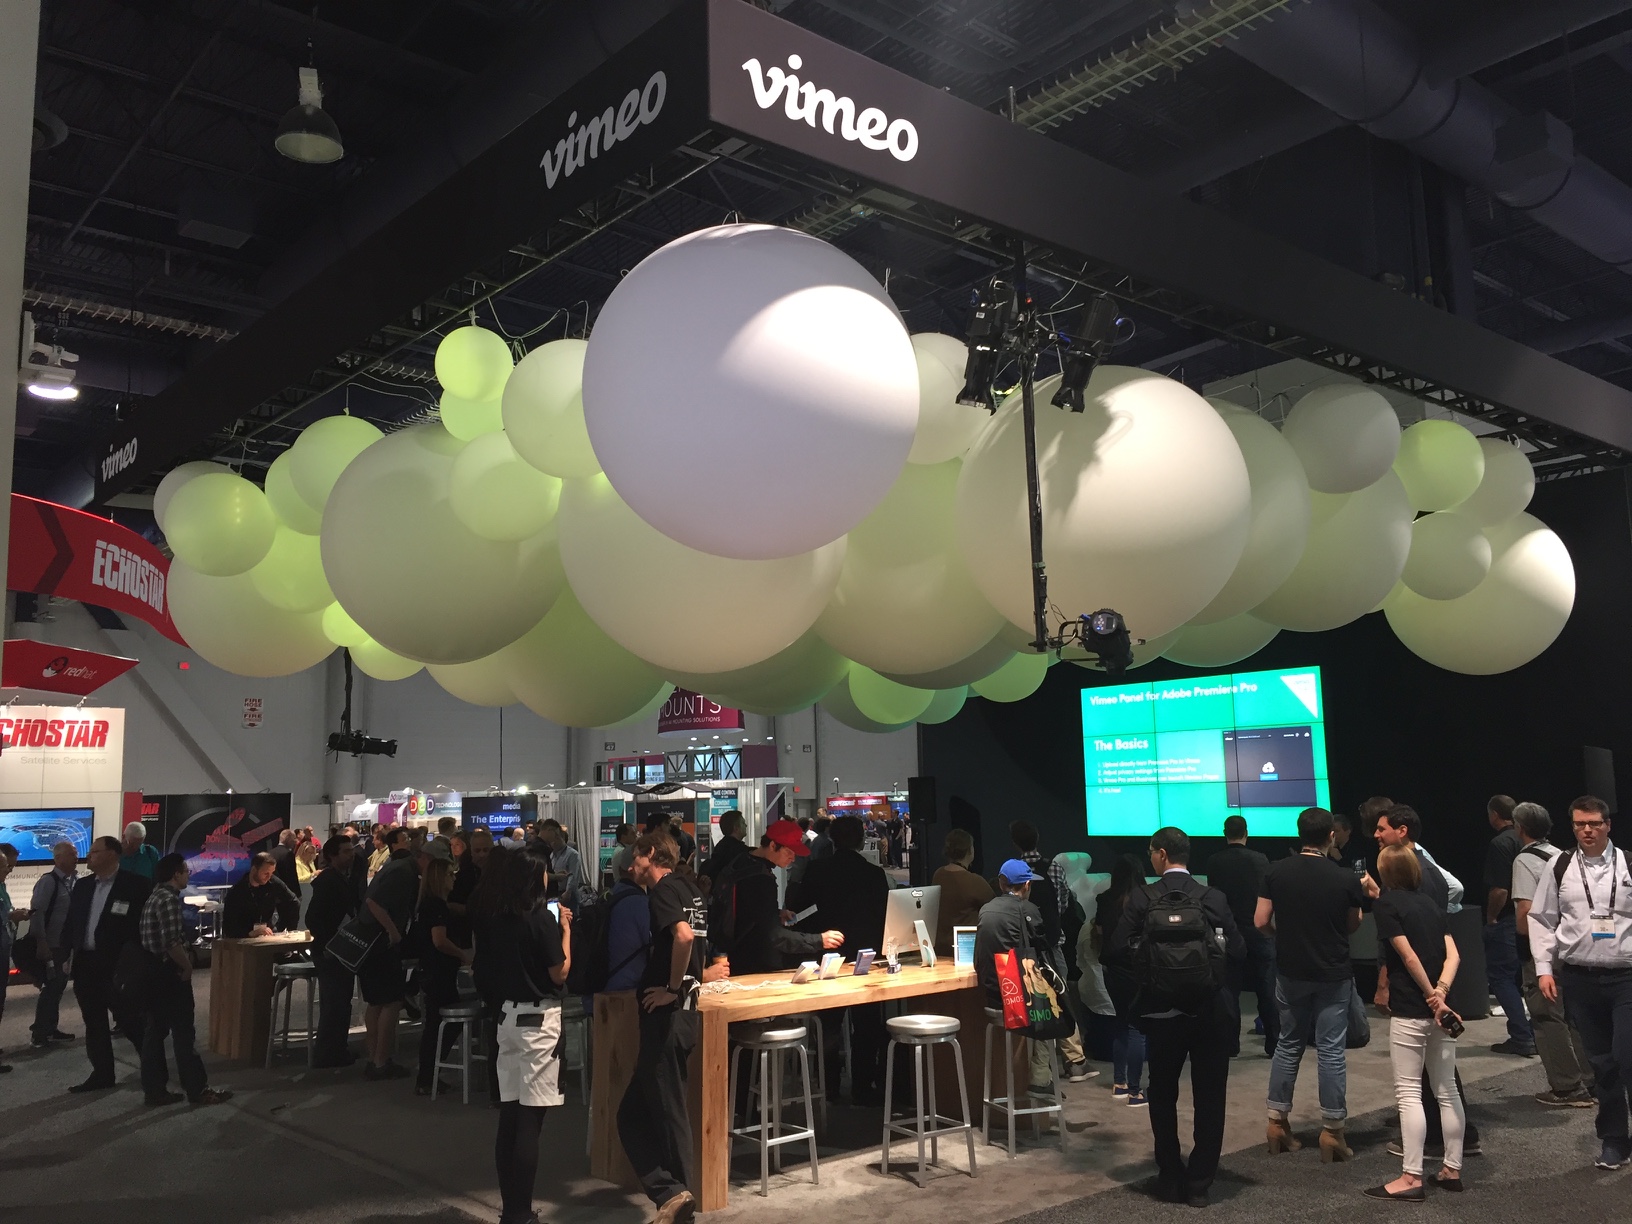 Vimeo 360 Enables Filmmakers to Make Money and Content with 360 Video 4